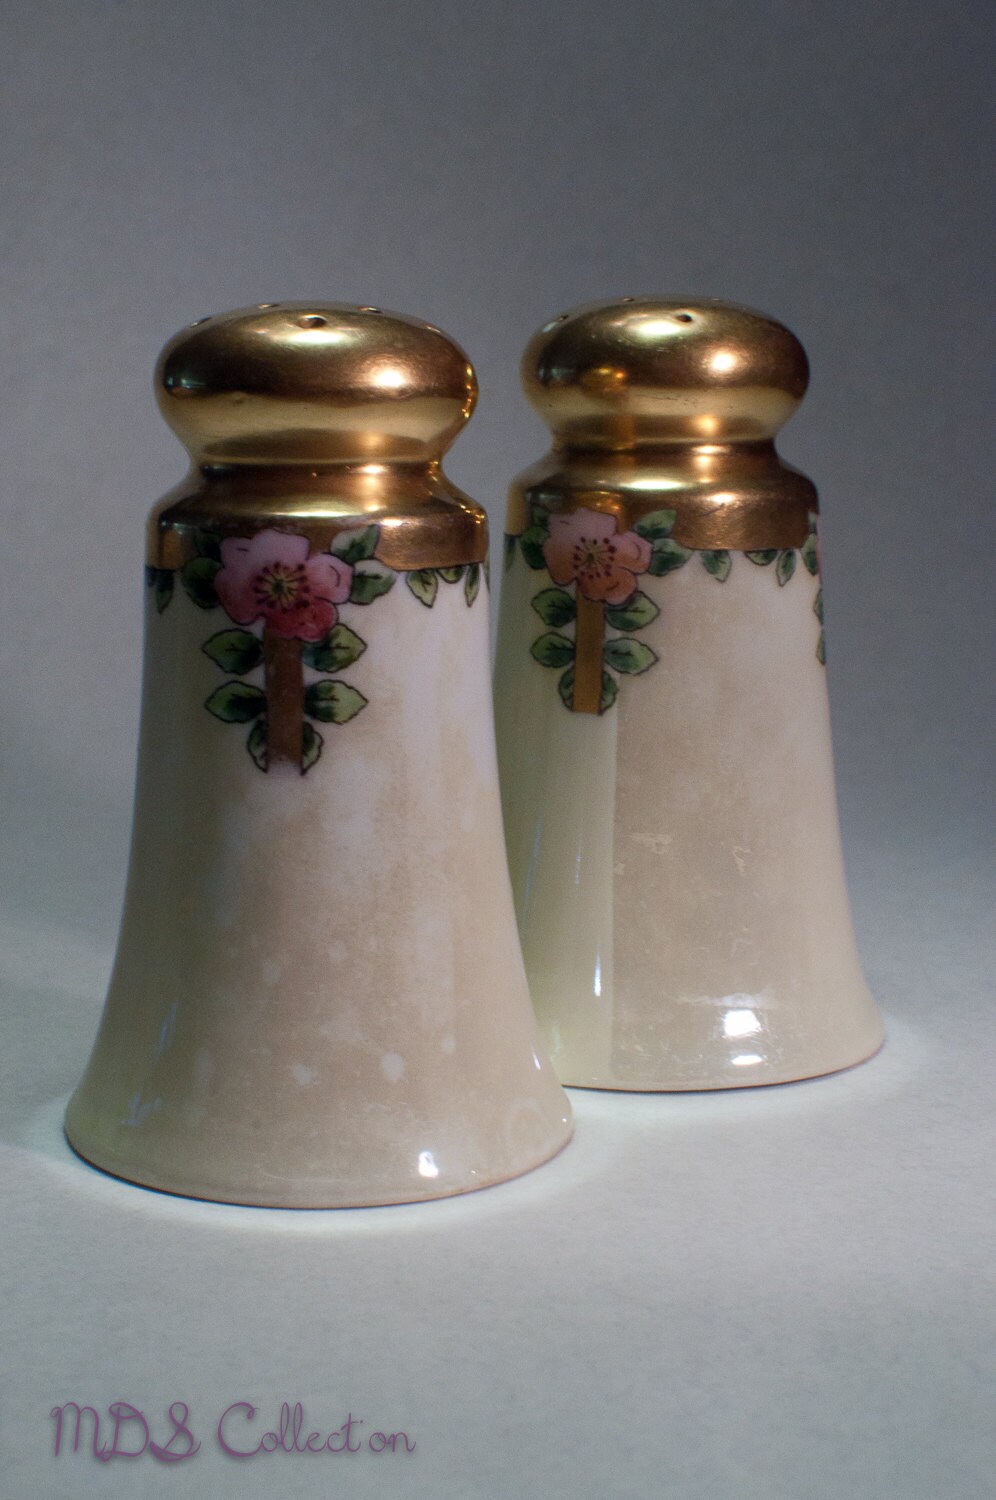 Vintage Lusterware Salt And Pepper Set With Gold By Mdscollection